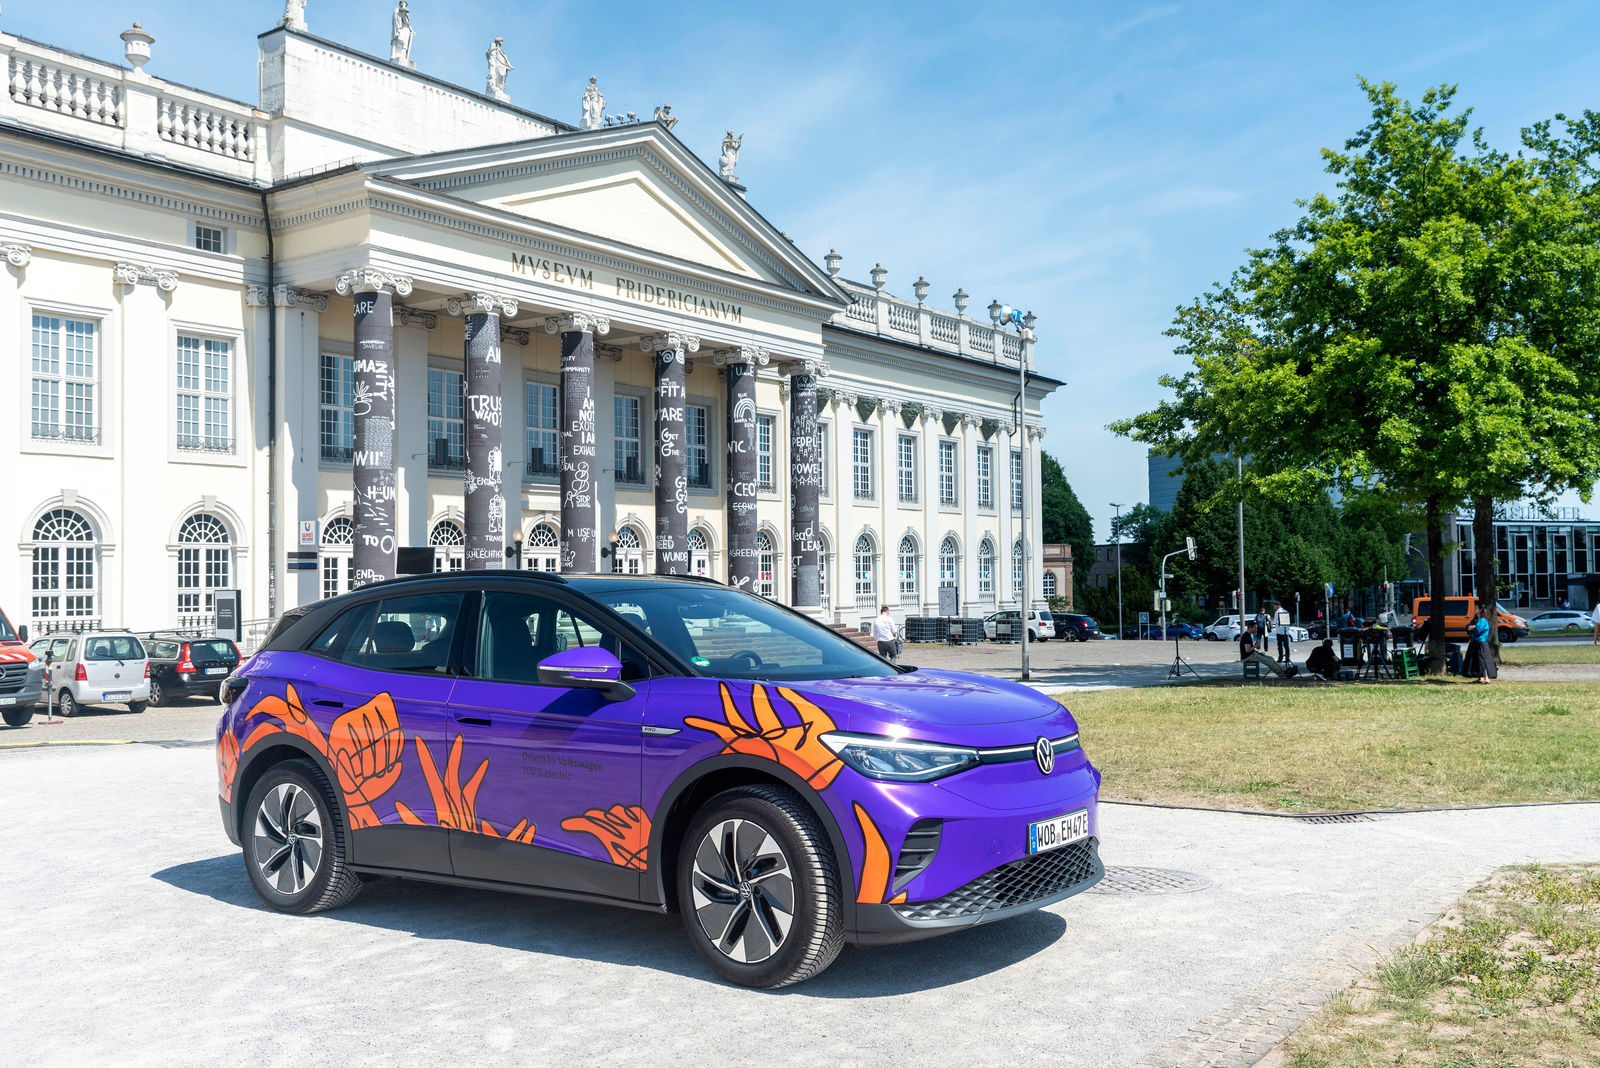 documenta fifteen opens: Volkswagen supports sustainability goals as lead partner